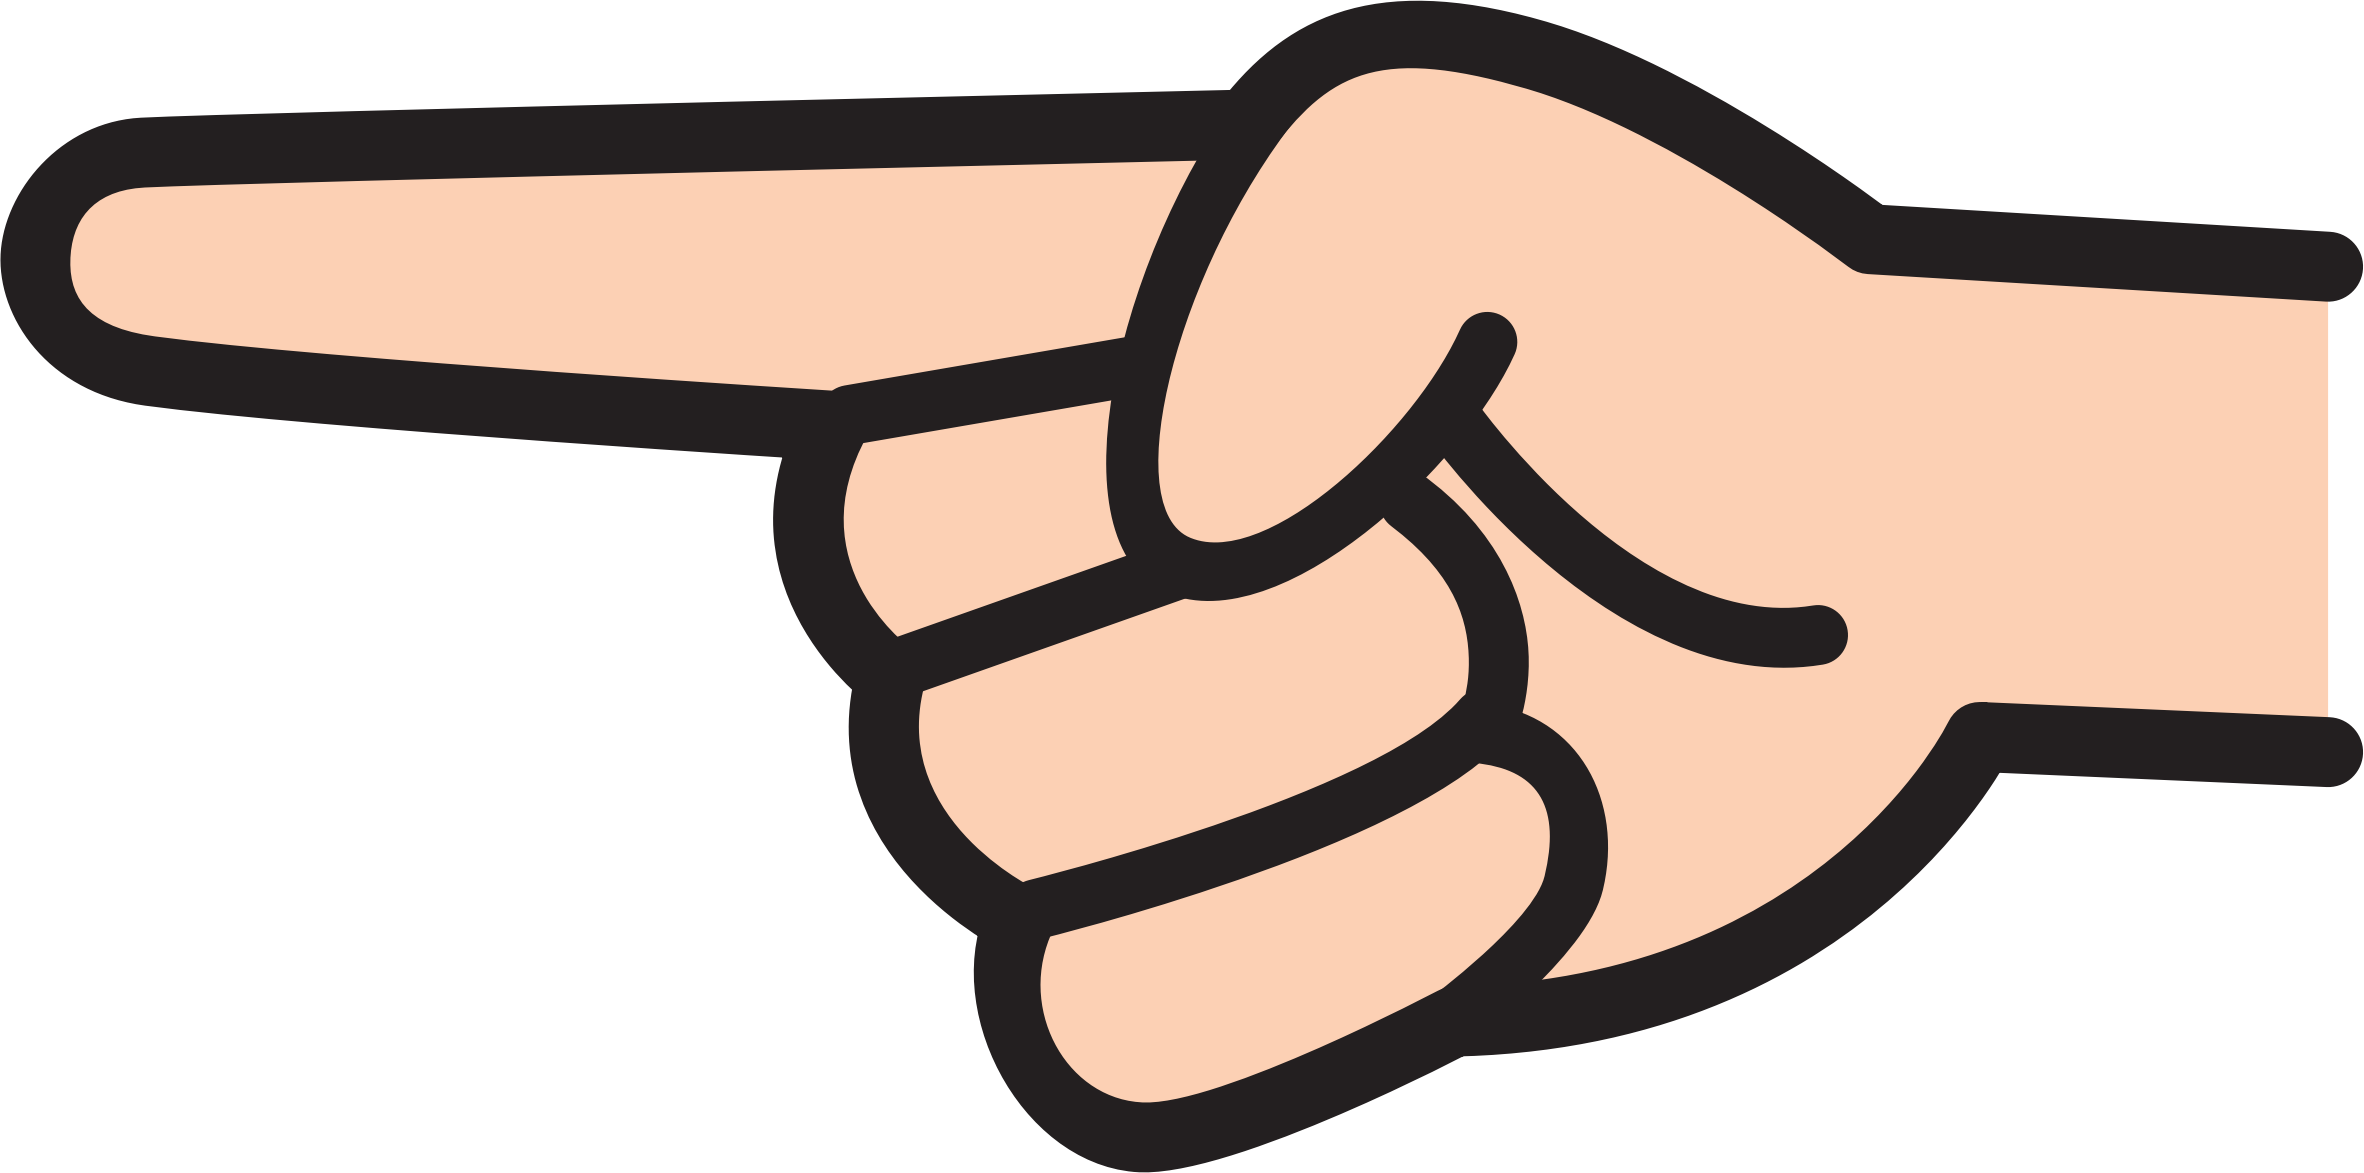 Pointing clipart finger.